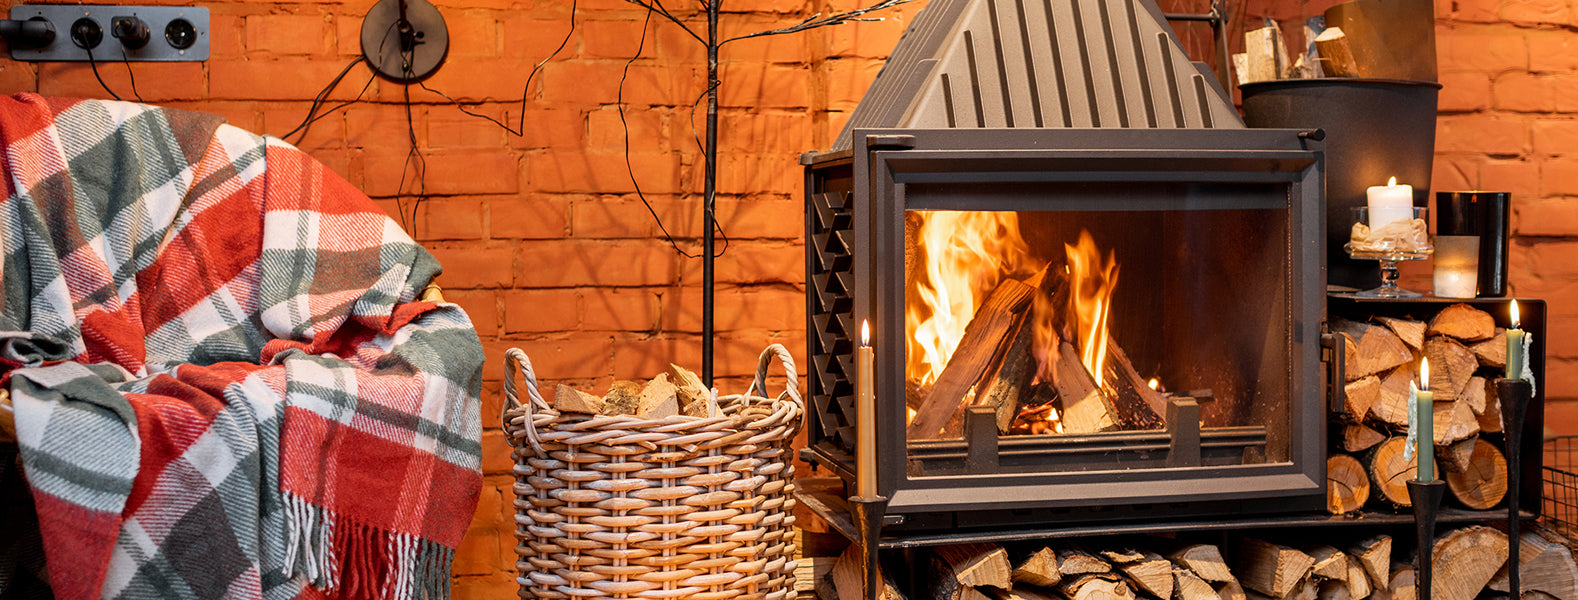 Are wood burning stoves bad for the environment?